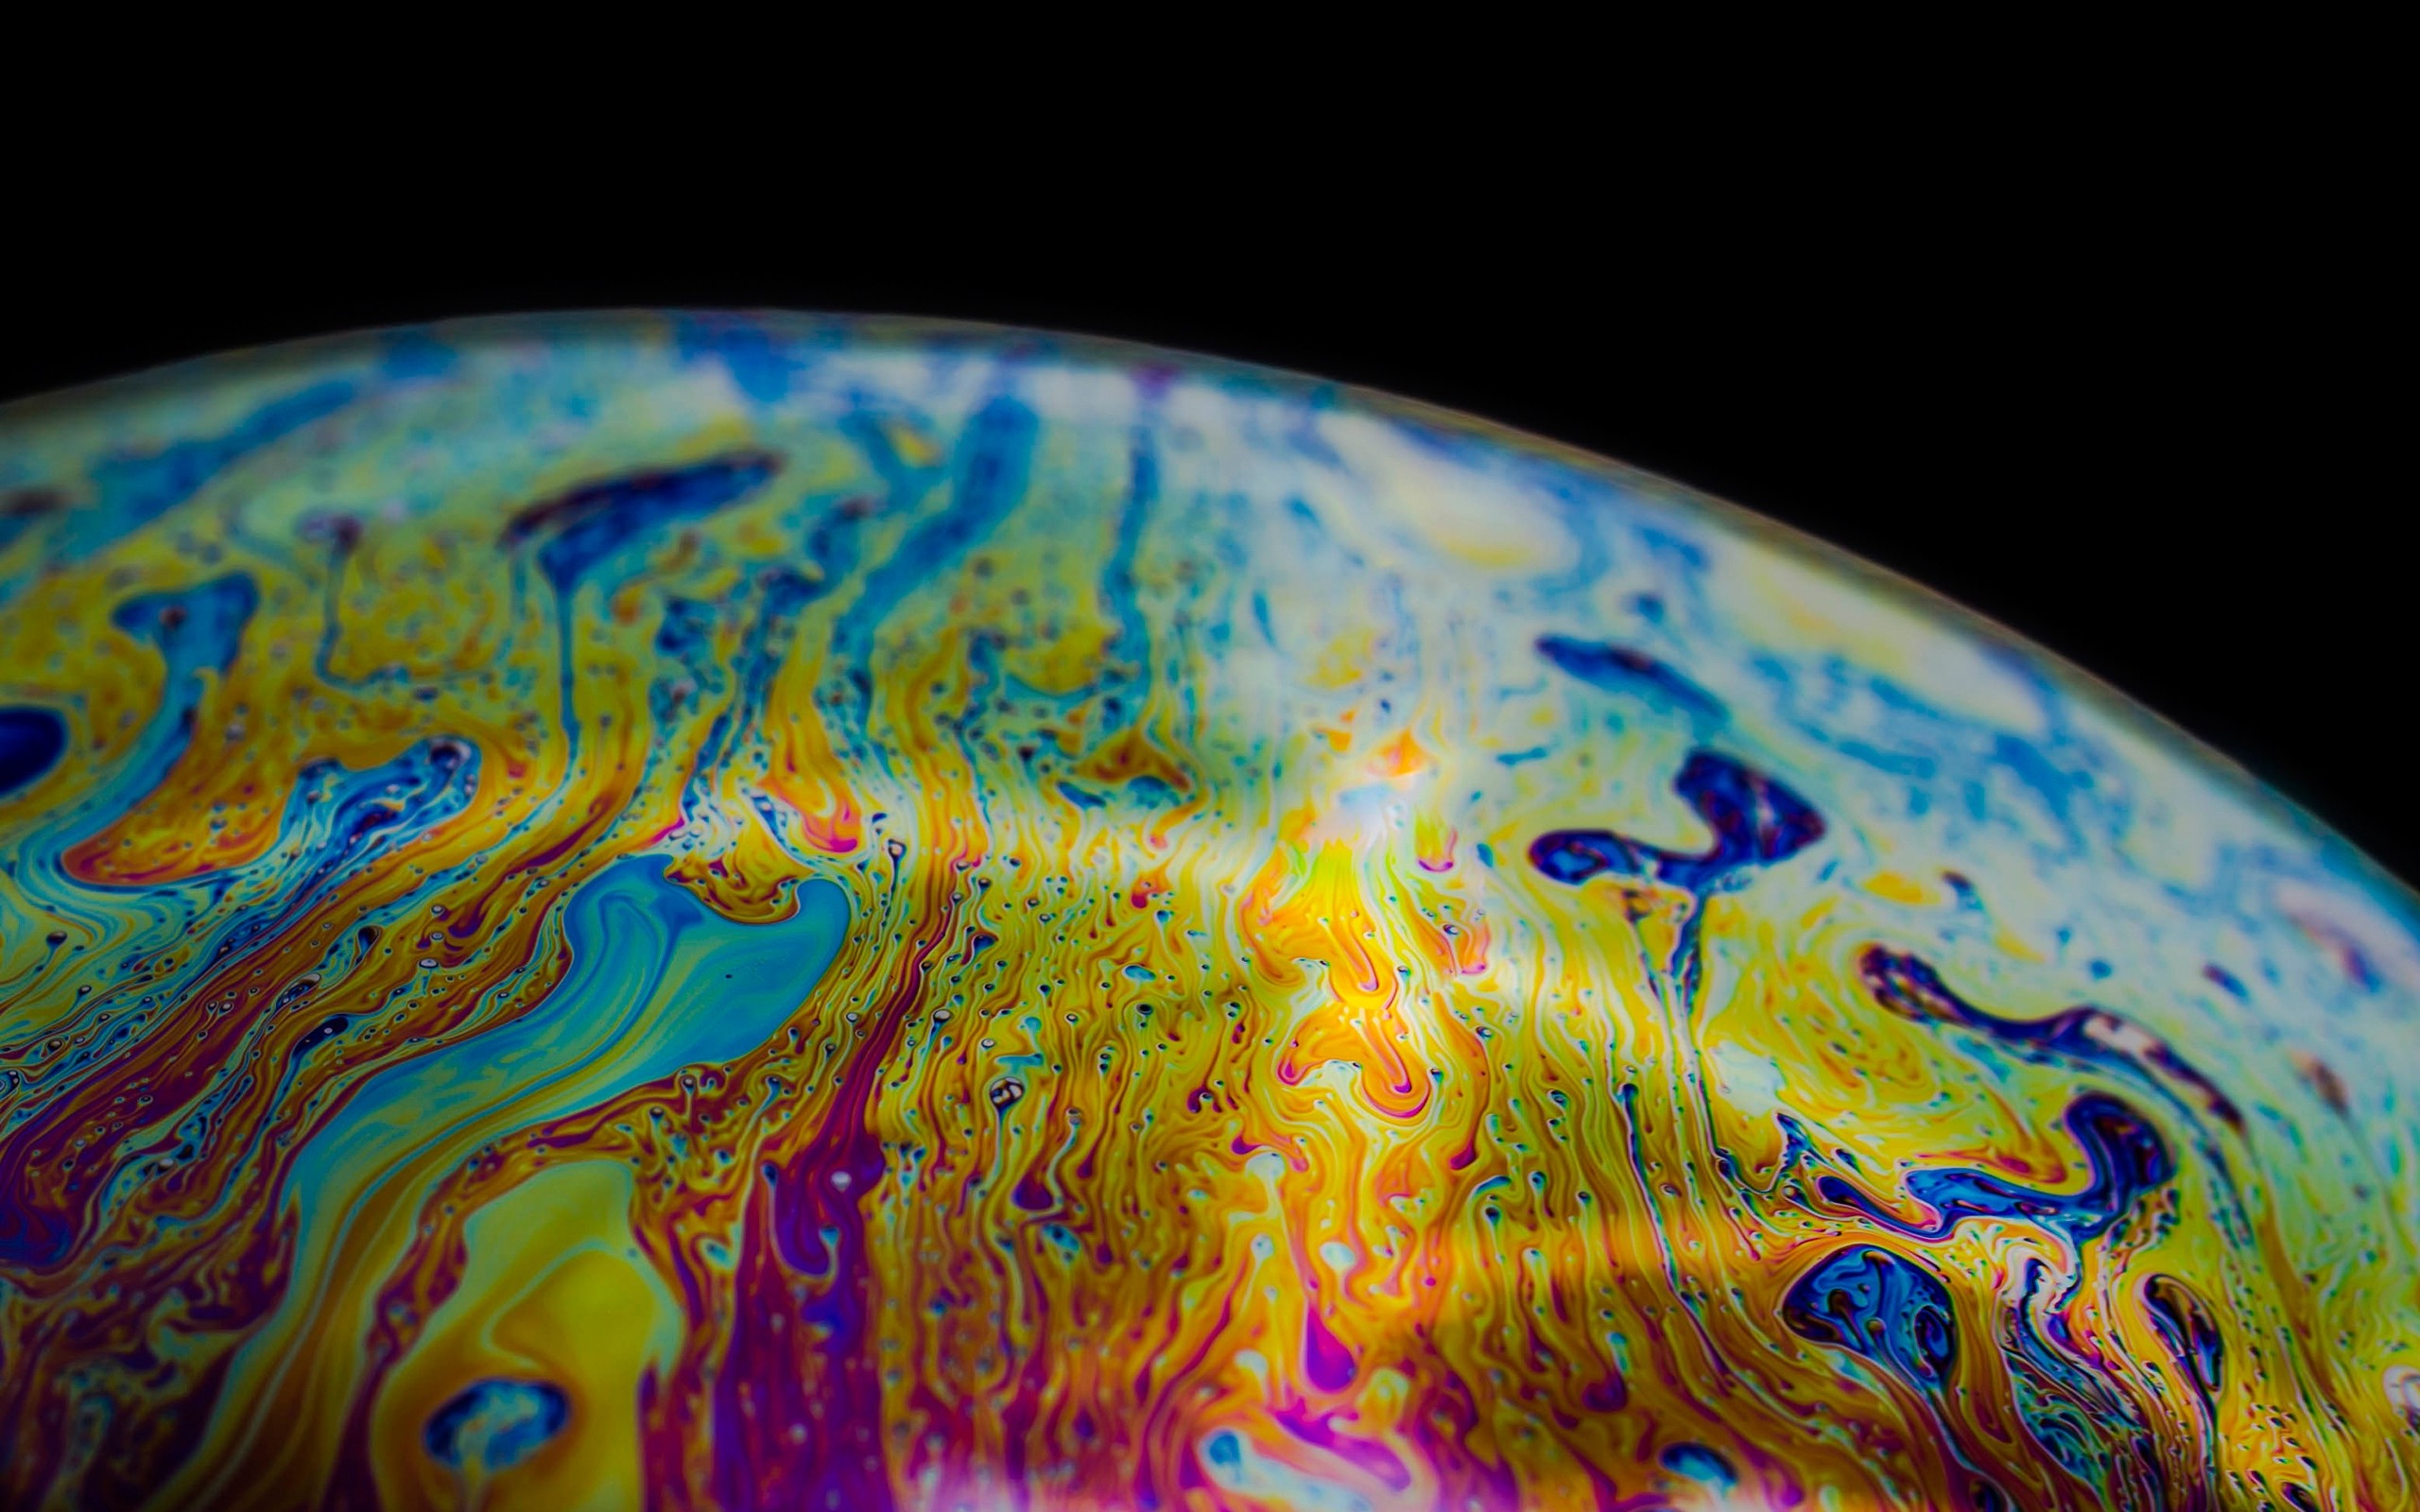 soap, Bubbles, Macro, Abstract, Colorful, Photography, Black Background Wallpaper